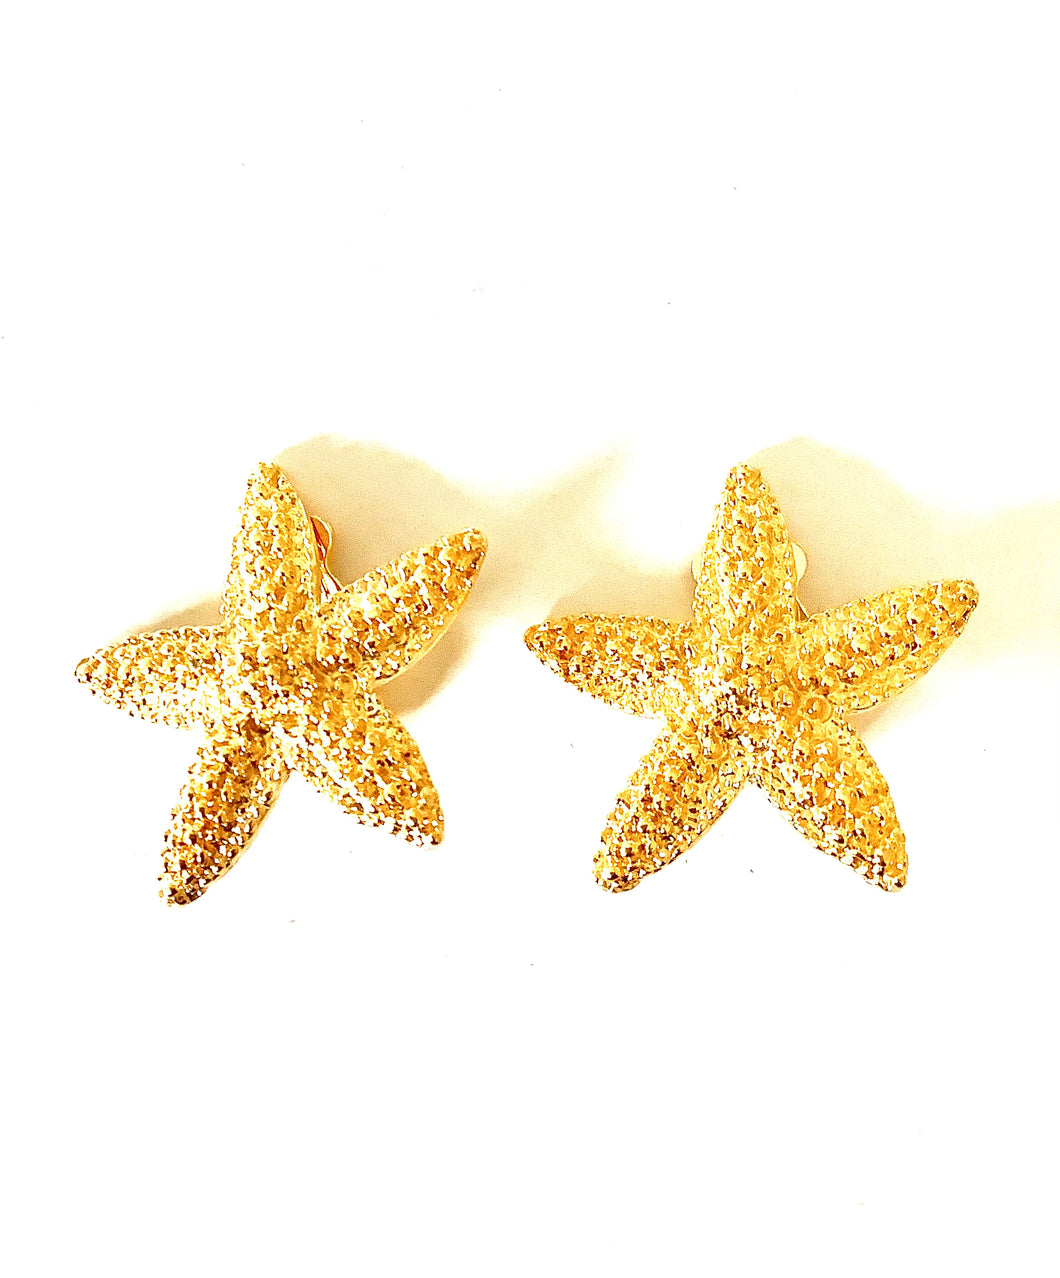 Clip On Vintage Gold Starfish Earrings